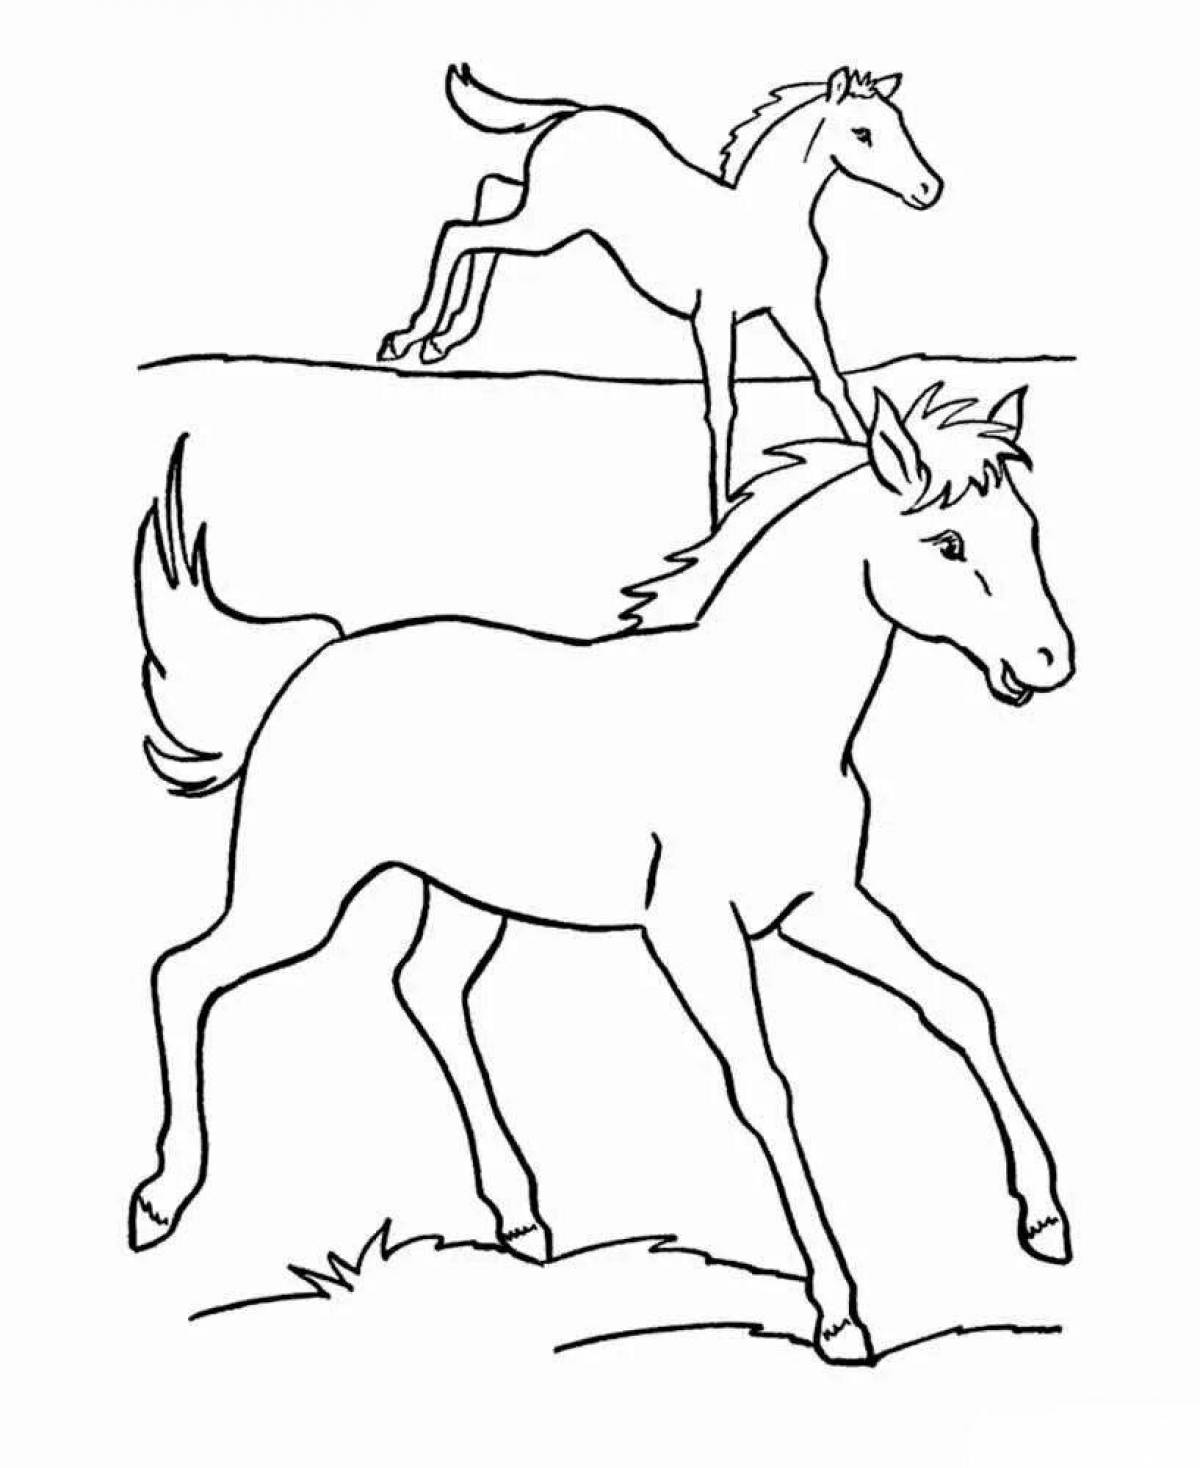 Silly foal coloring page